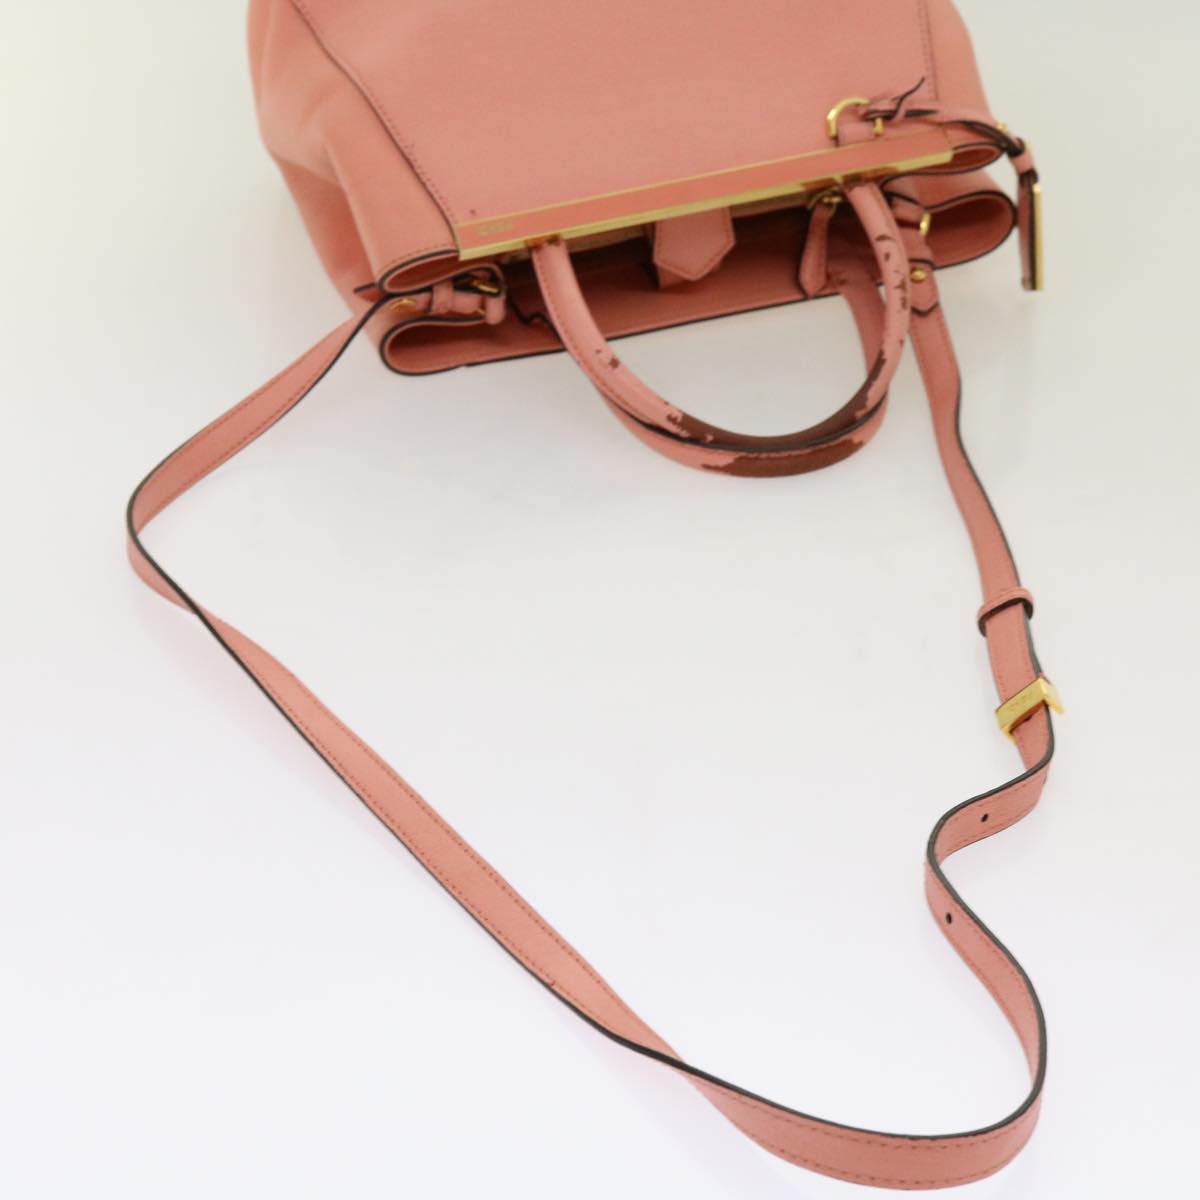 FENDI Hand Bag Leather 2way Pink Auth 69672